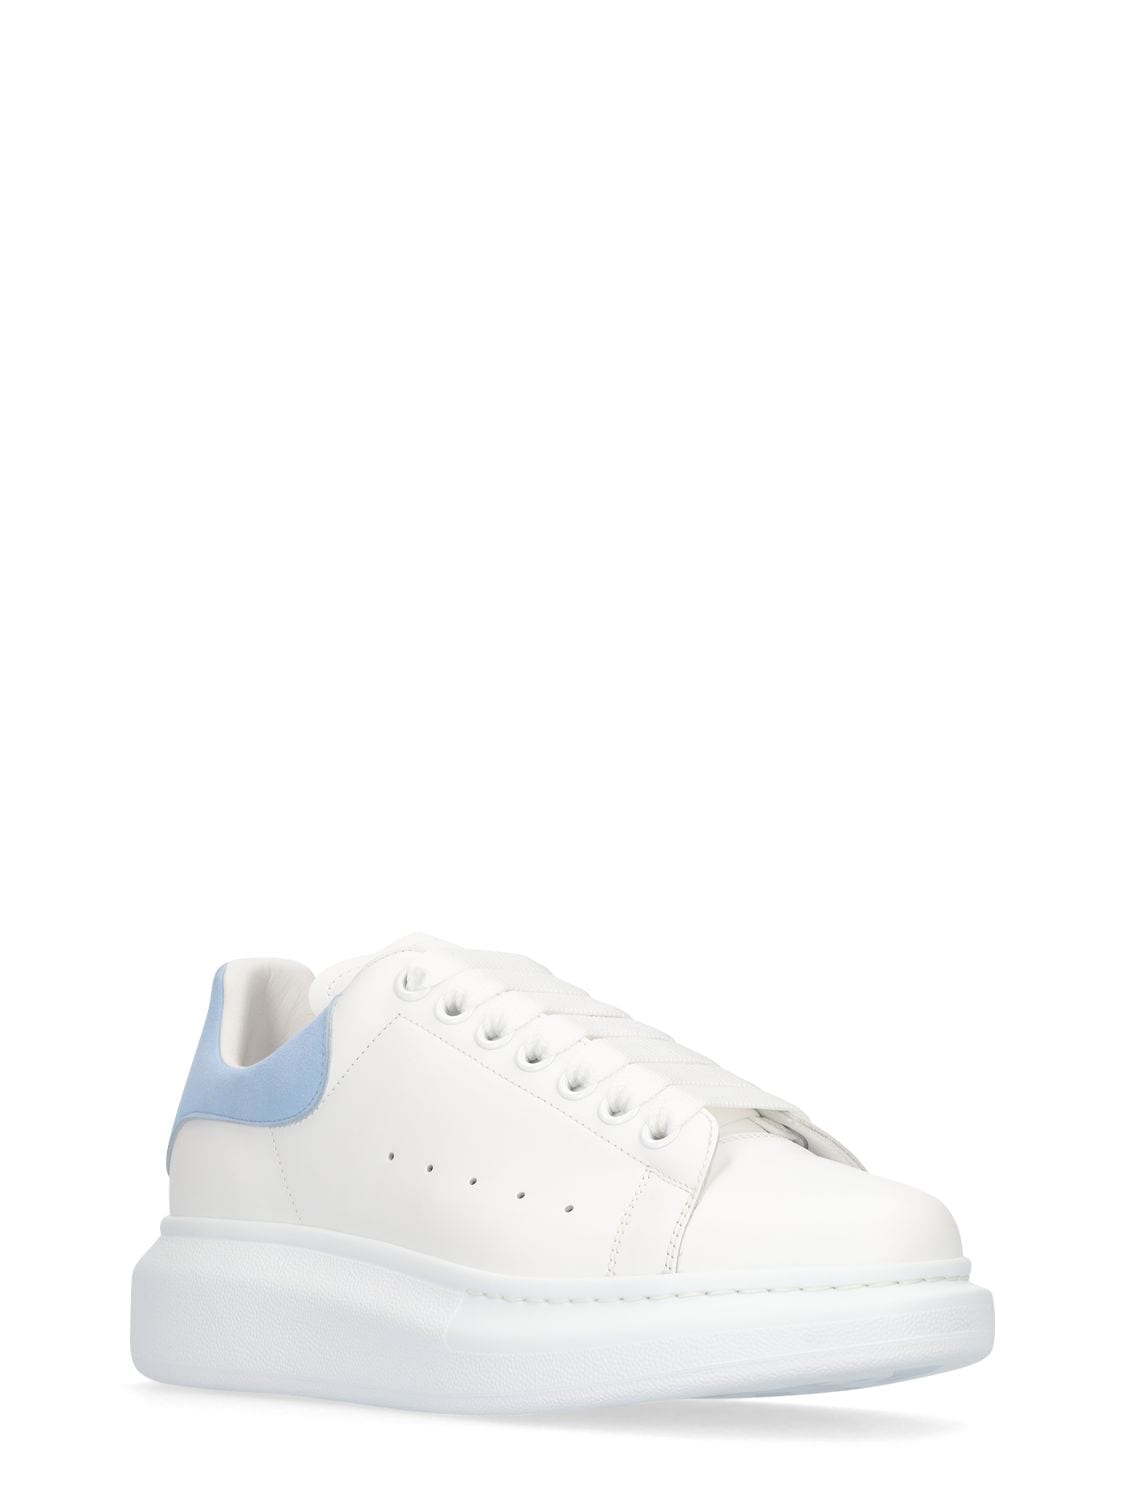 Oversized Sneakers - Alexander McQueen - White/Powder Blue - Leather